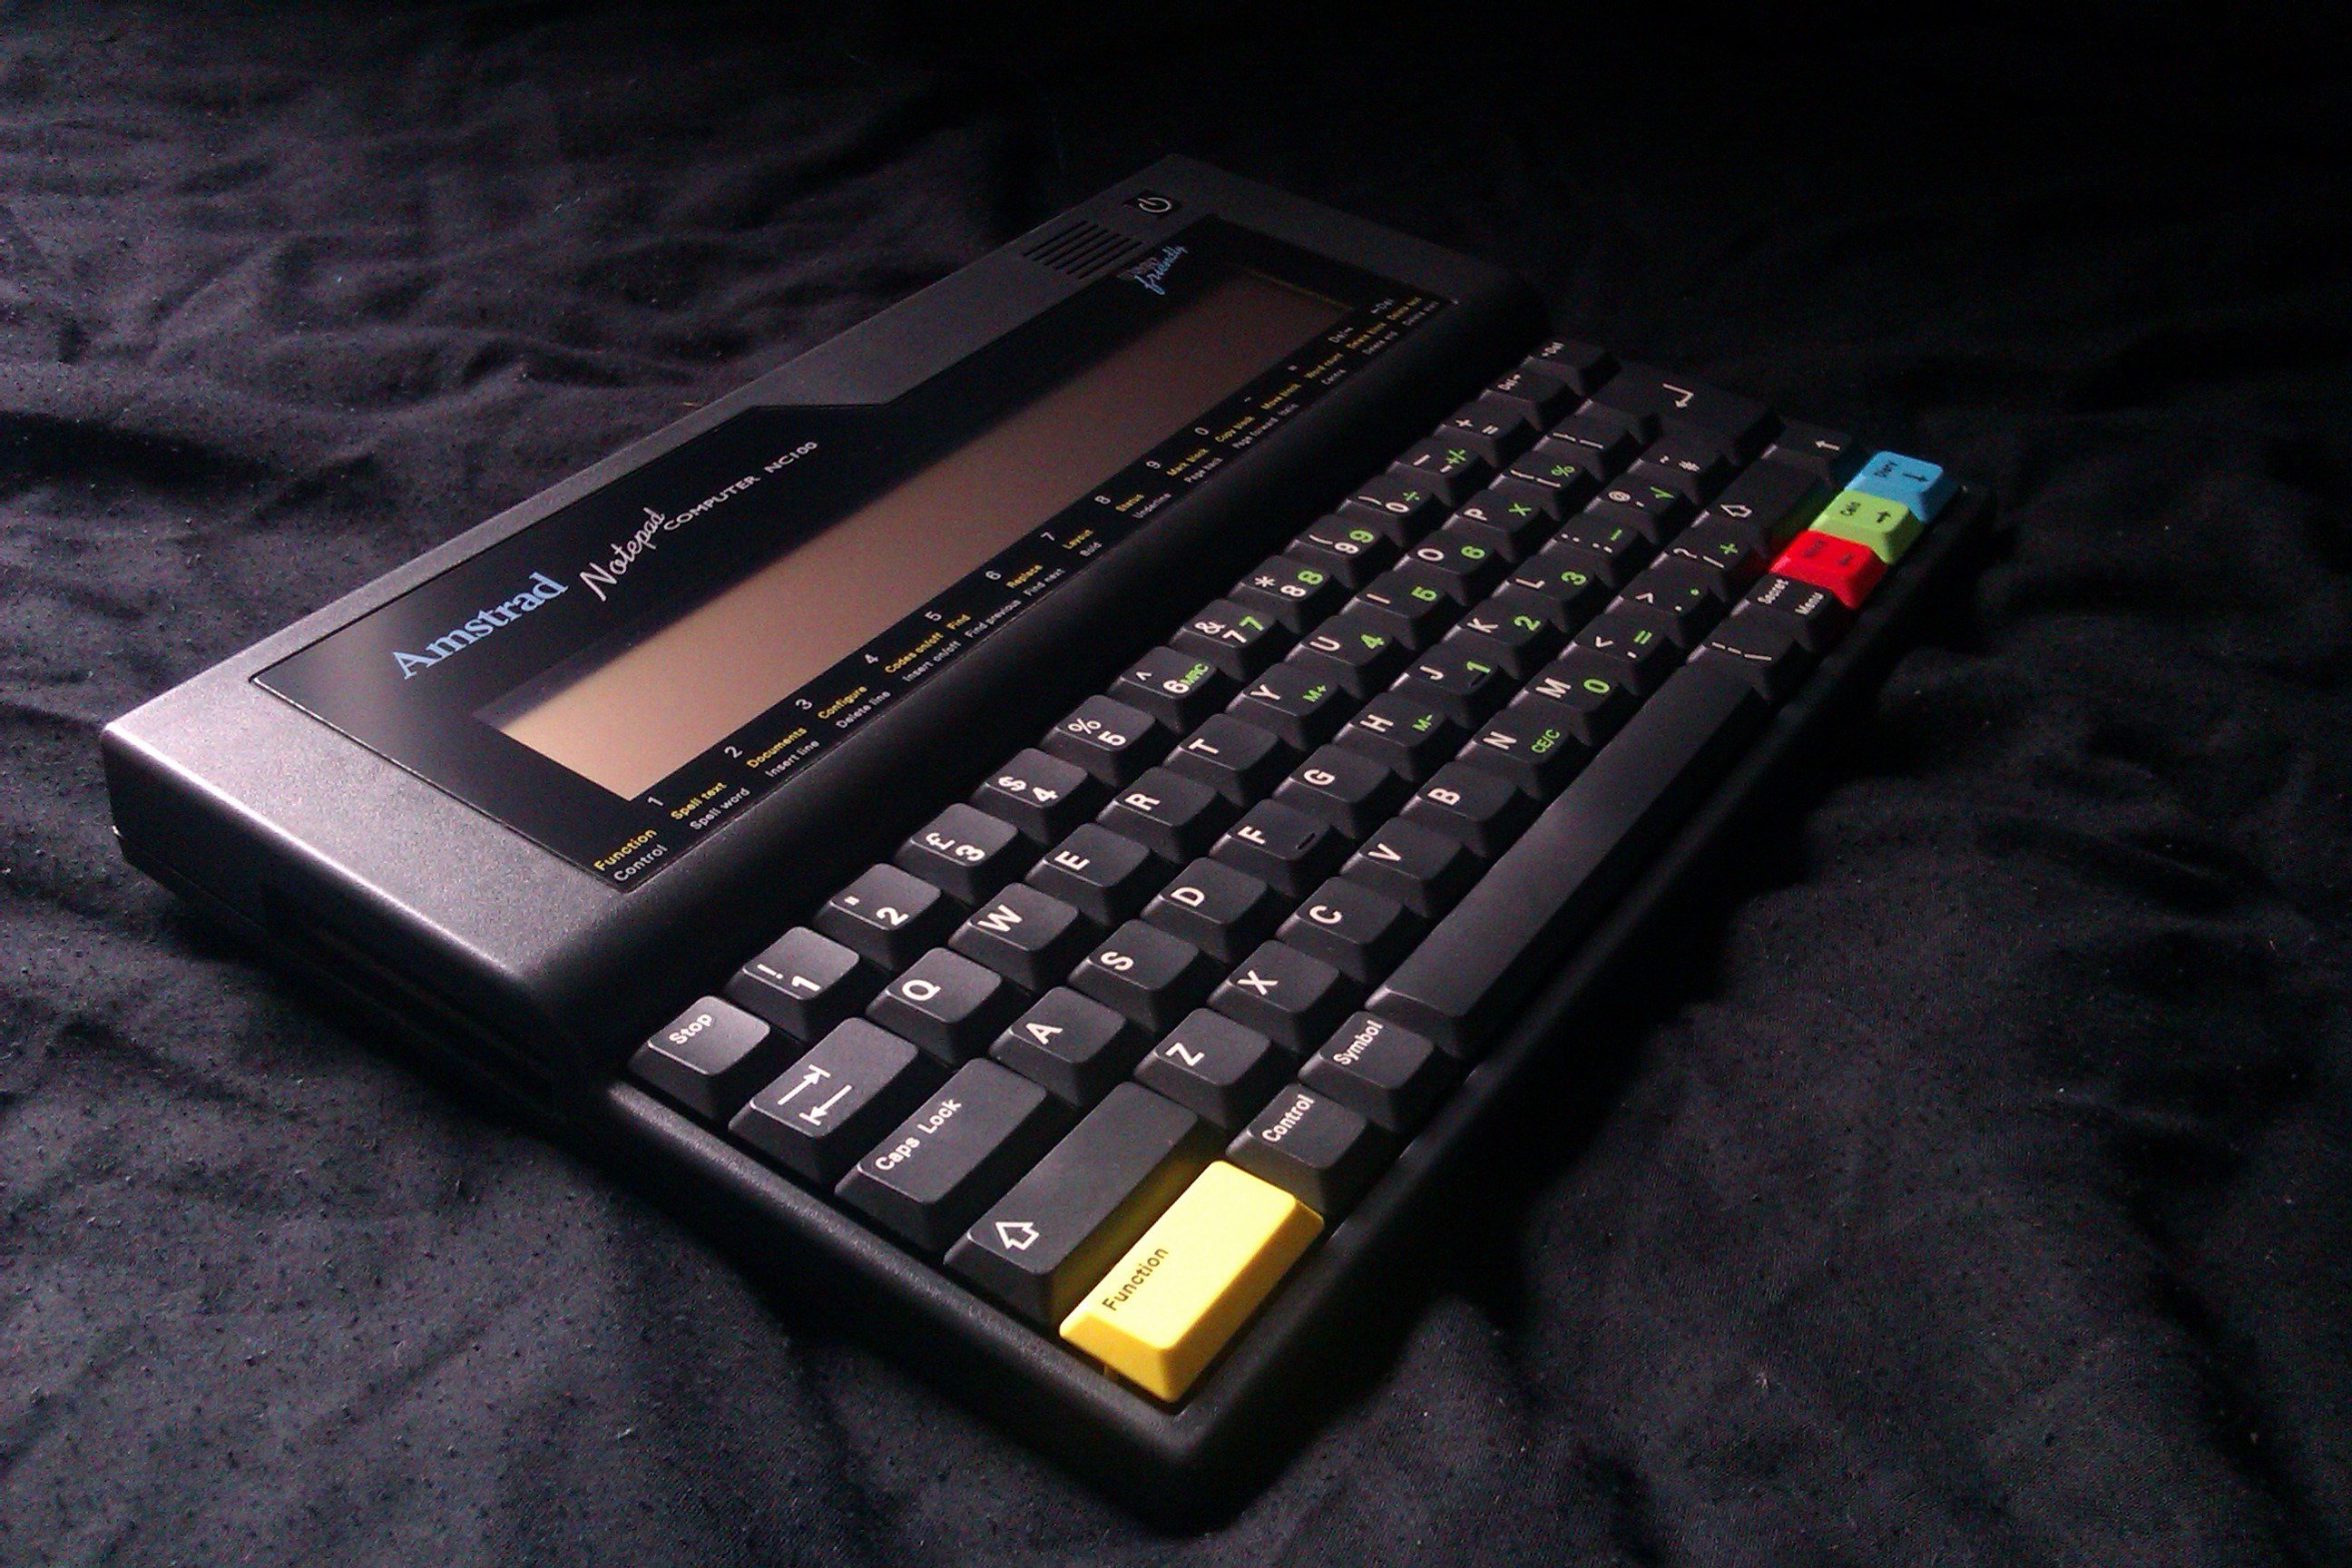 An Amstrad NC100 Notepad Computer, which is a flat device with an LCD screen and full keyboard. Most of the keys are black with white text, but four are brightly coloured: one is yellow, one is red, one is green, and one is blue.